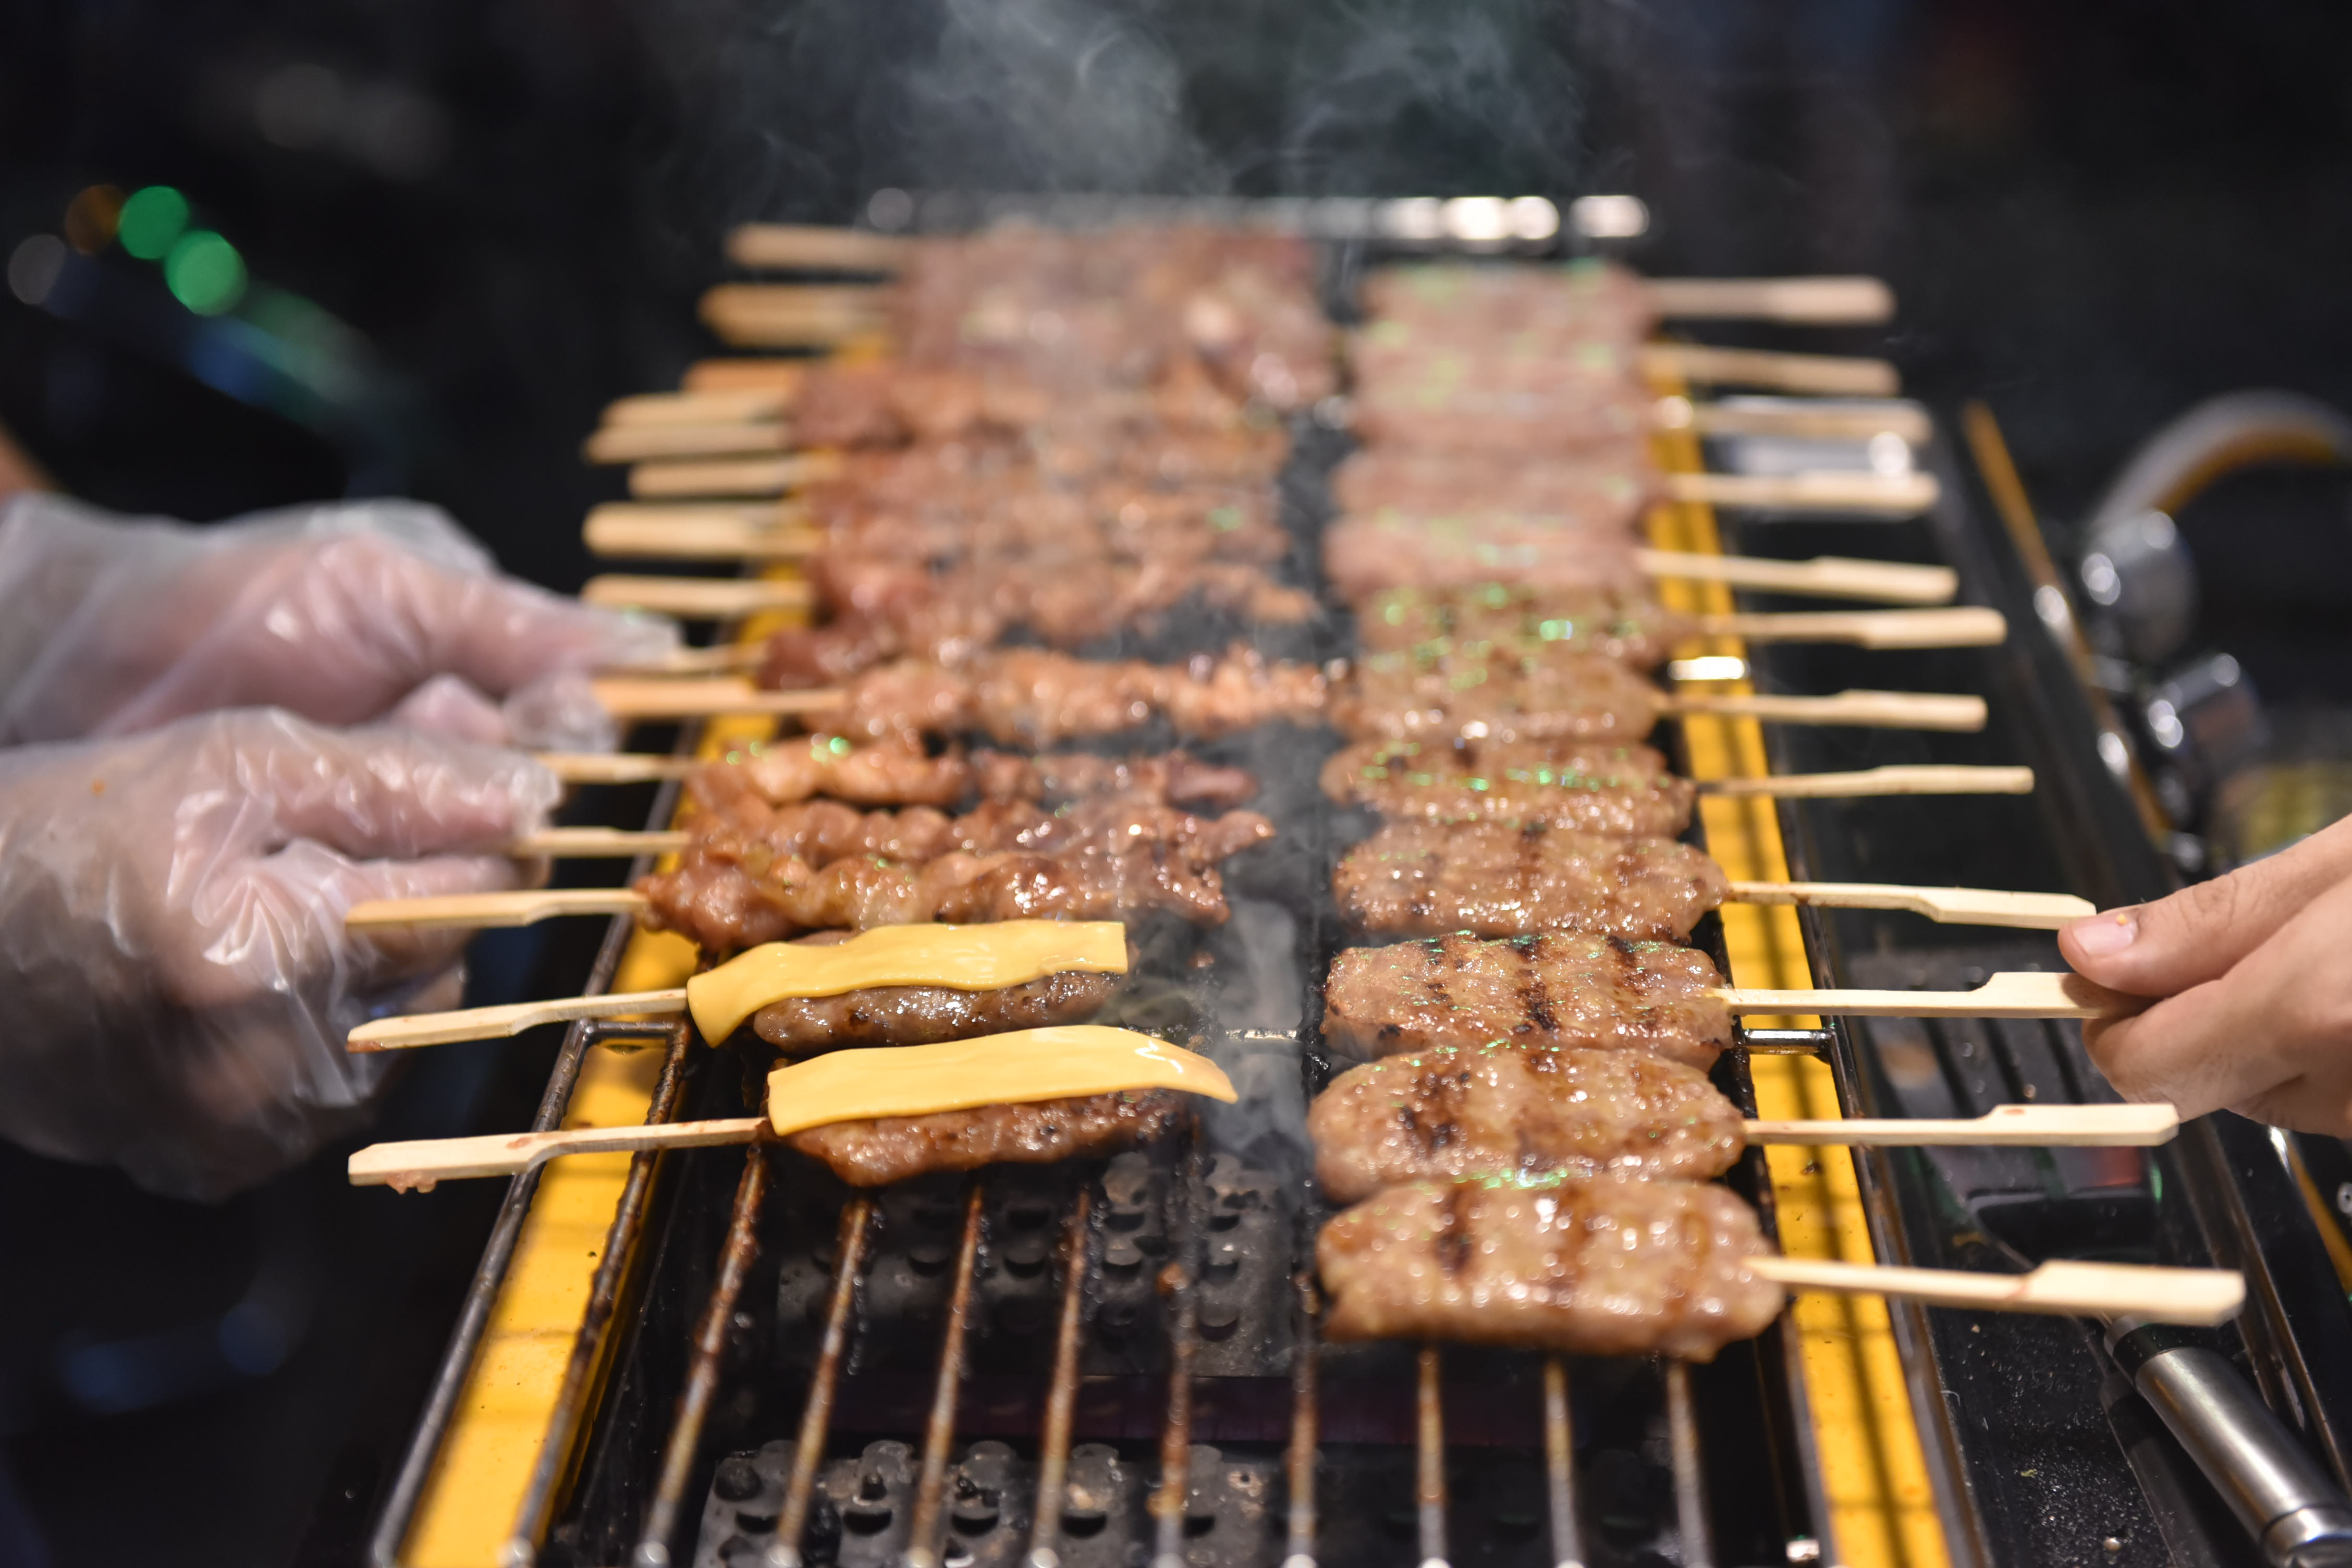 Thai-style grilled pork skewers are seen at a stall at Ho Thi Ky Food Street in Ho Chi Minh City’s District 10 on October 19, 2021. Photo: Ngoc Phuong / Tuoi Tre